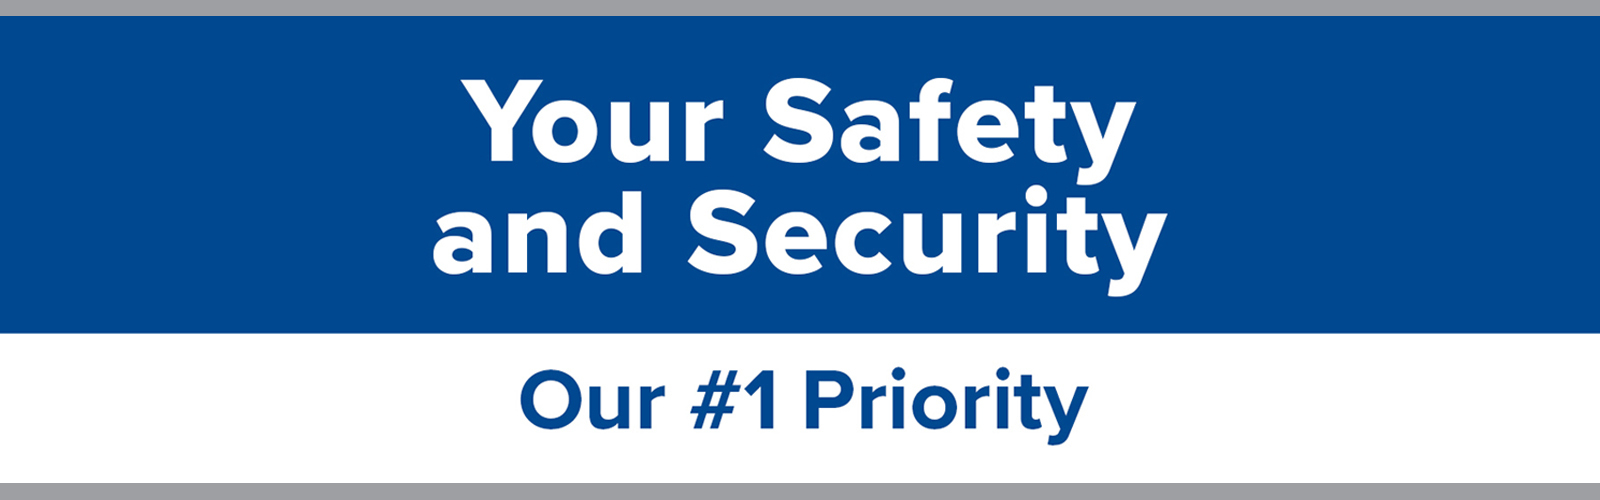 Your safety and security out #1 priority